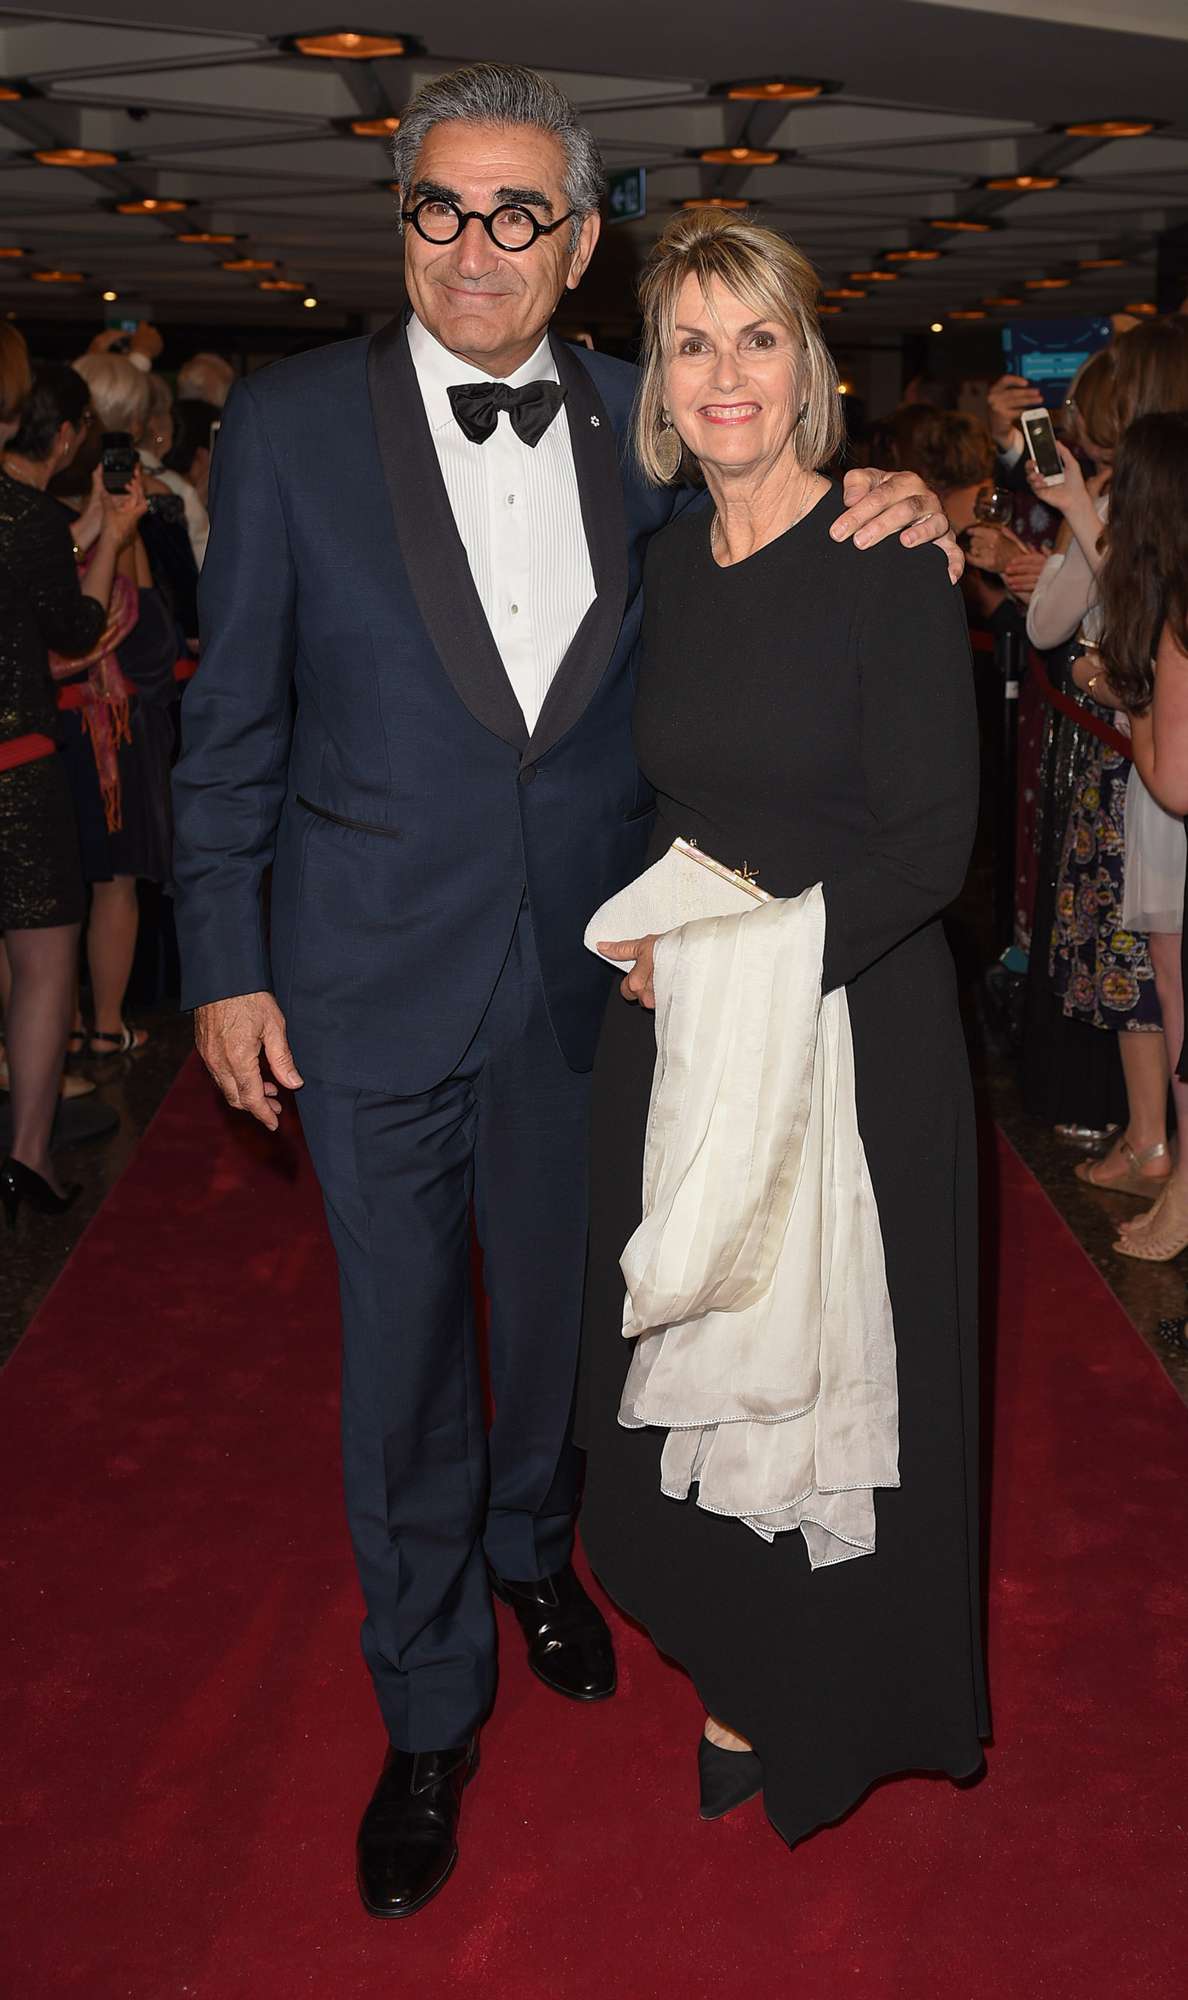 Eugene Levy and Deborah Divine attend the Governor General's Awards 25th Anniversary Gala at National Arts Centre on June 29, 2017 in Ottawa, Canada